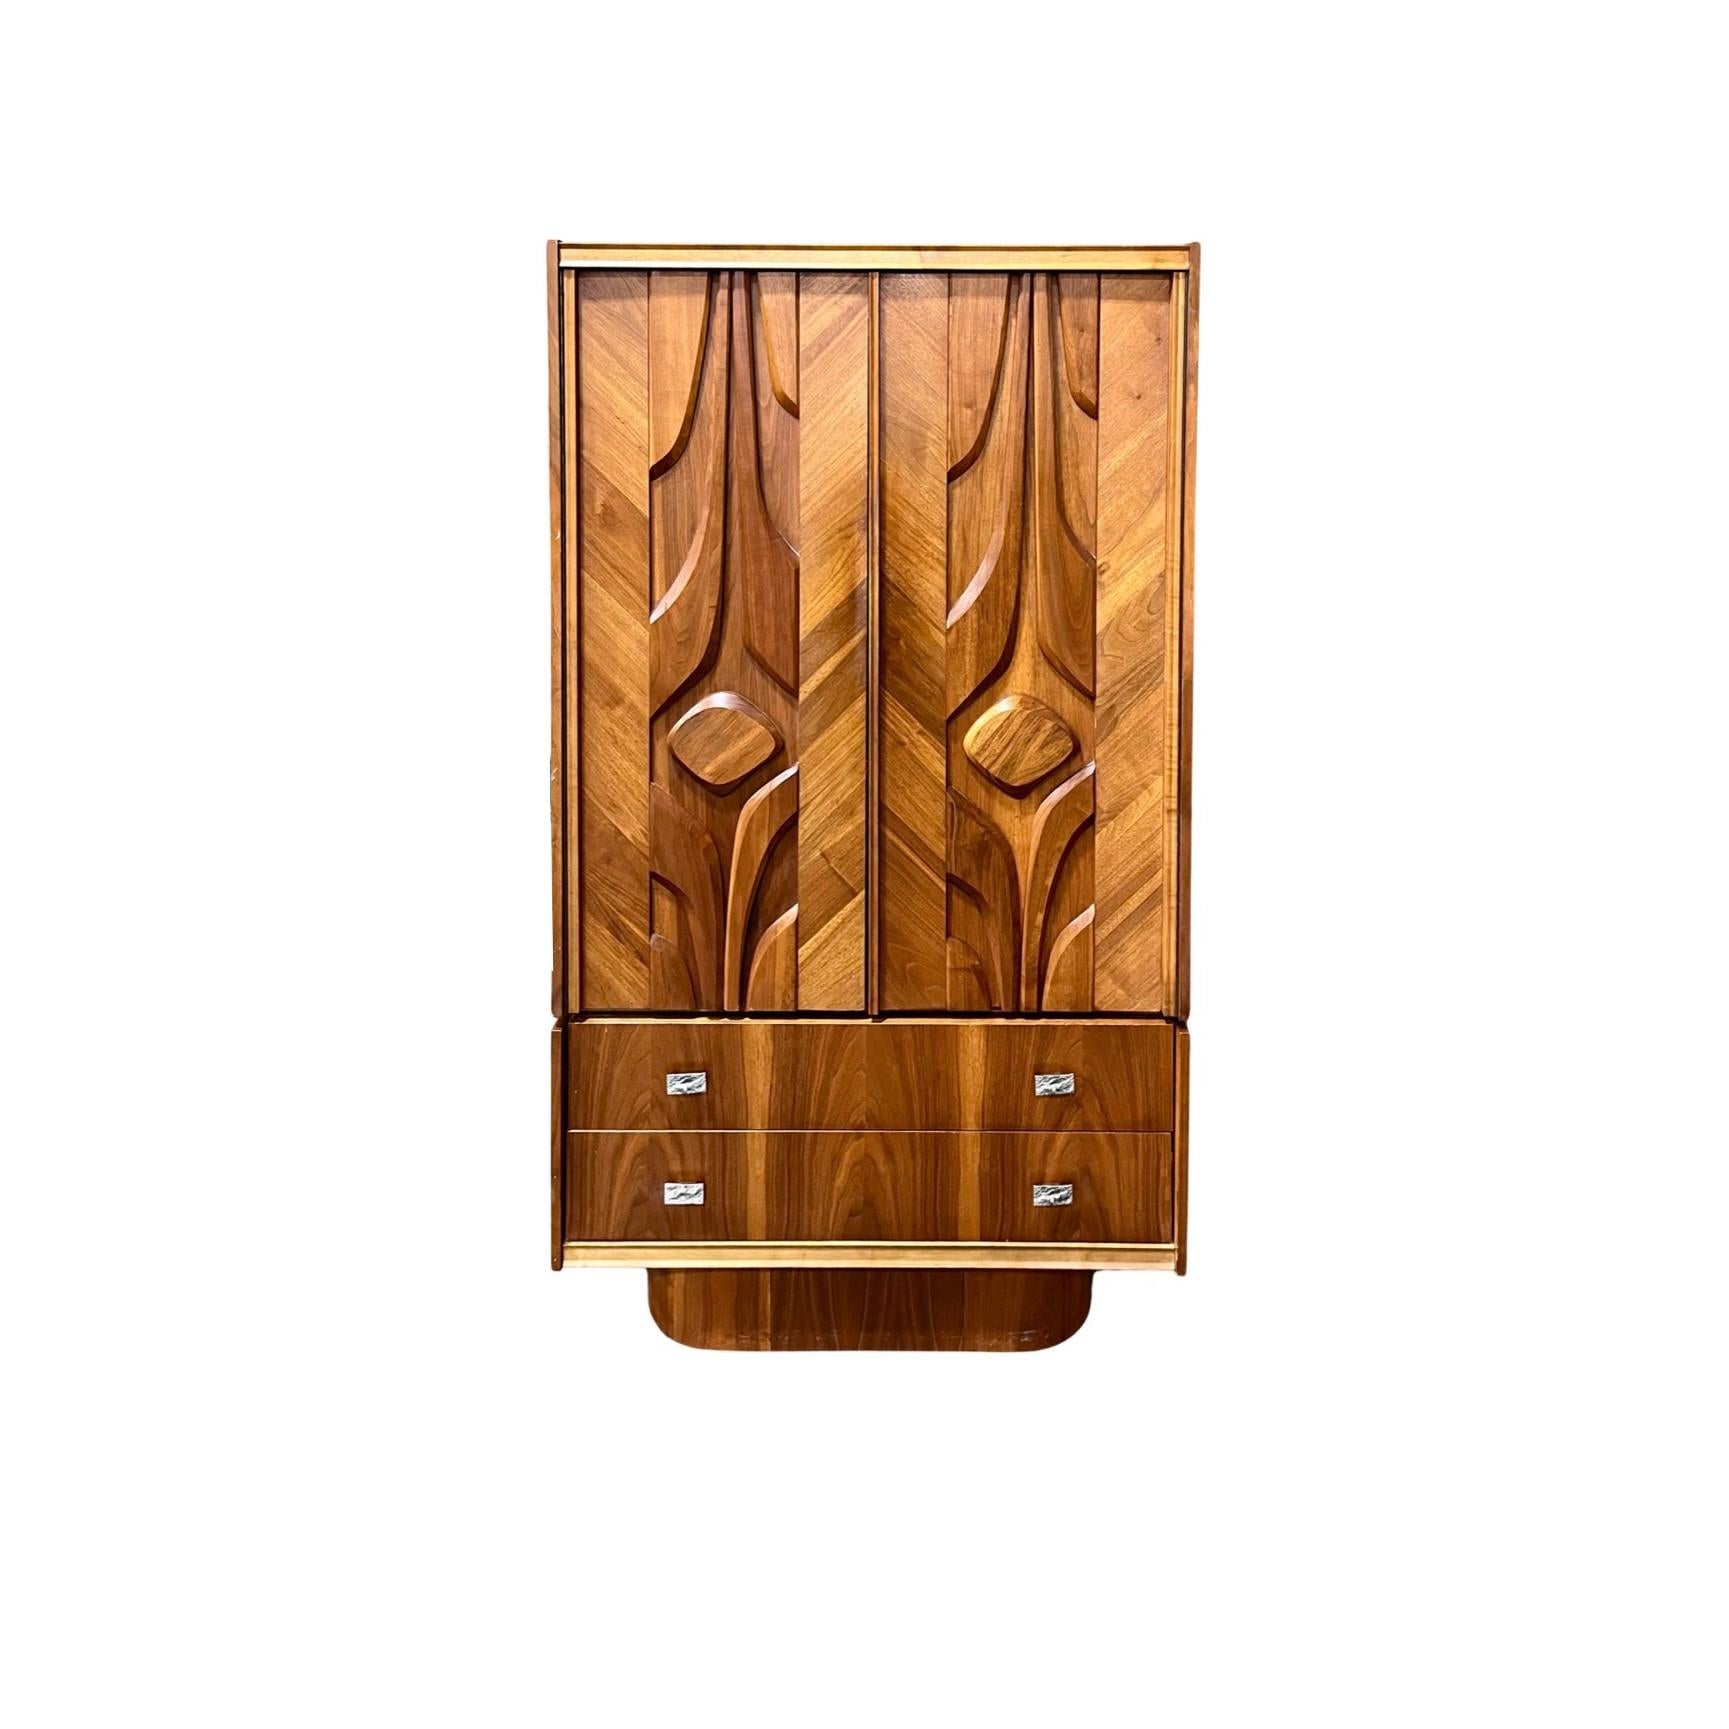 Tobago Furniture vintage brutalist mid century modern 4 drawer, 5 shelf armoire from the 1970s. This two-piece armoire by Tabago of Canada is a substantial piece of quality construction inspired by designers such as Paul Evan, Phillip Lloyd Powell,